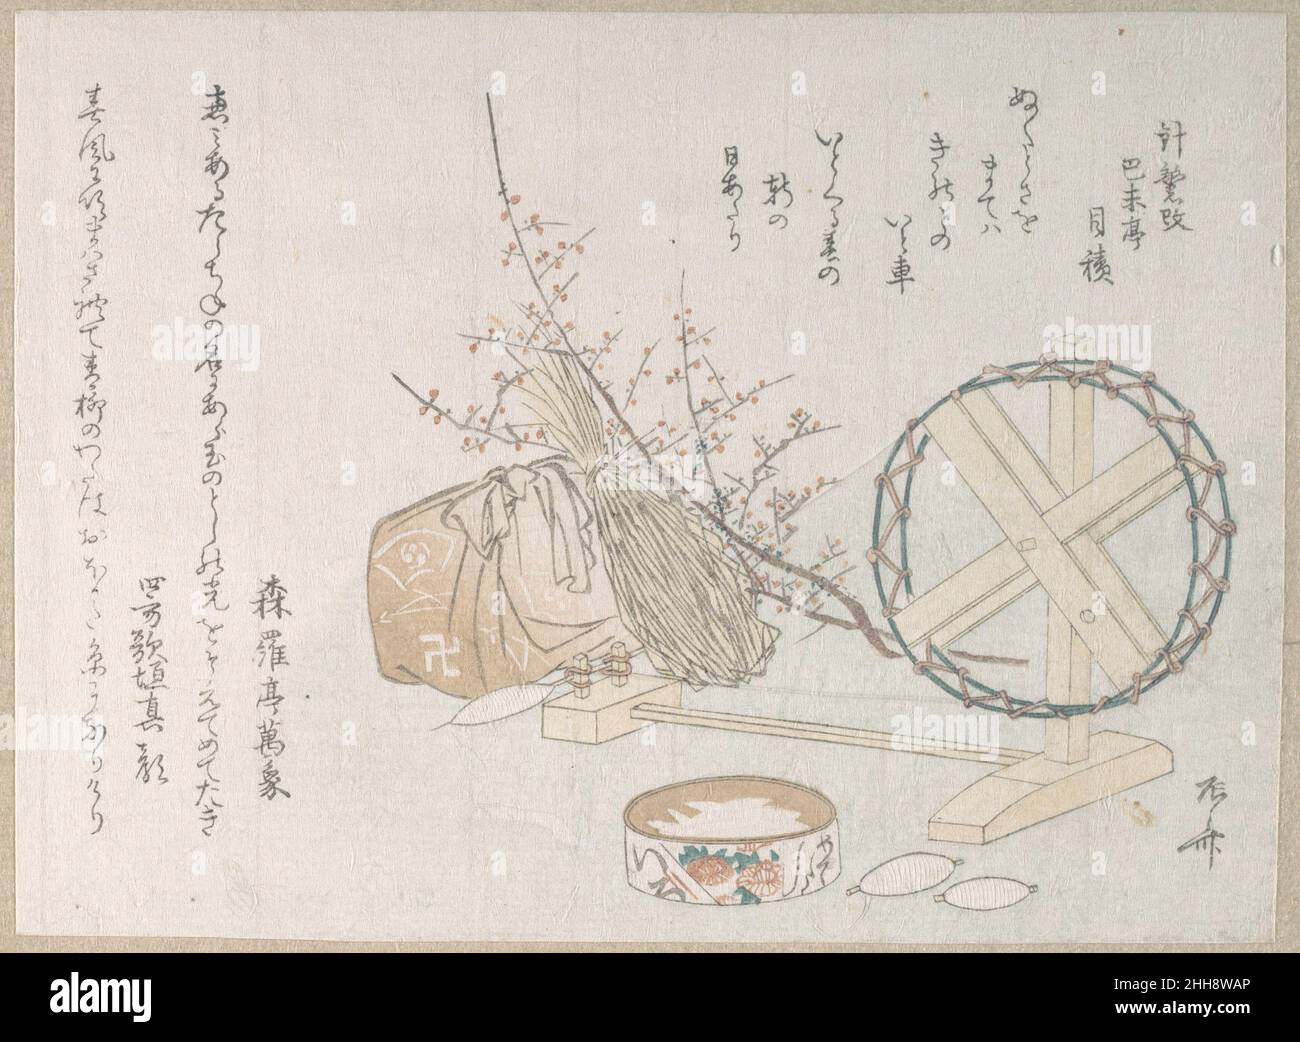 Spinning Wheel and Spools 19th century Ryūryūkyo Shinsai Japanese. Spinning Wheel and Spools  54101 Artist: Ryuryukyo Shinsai, Japanese, active ca. 1799?1823, Spinning Wheel and Spools, 19th century, Part of an album of woodblock prints (surimono); ink and color on paper, 5 5/16 x 7 3/16 in. (13.5 x 18.3 cm). The Metropolitan Museum of Art, New York. H. O. Havemeyer Collection, Bequest of Mrs. H. O. Havemeyer, 1929 (JP2317) Stock Photo